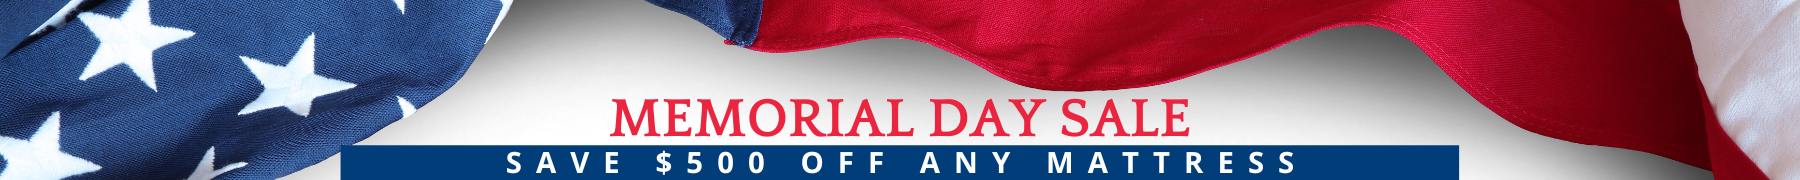 American Flag and Memorial Day Sale. Save $500 off any mattress.